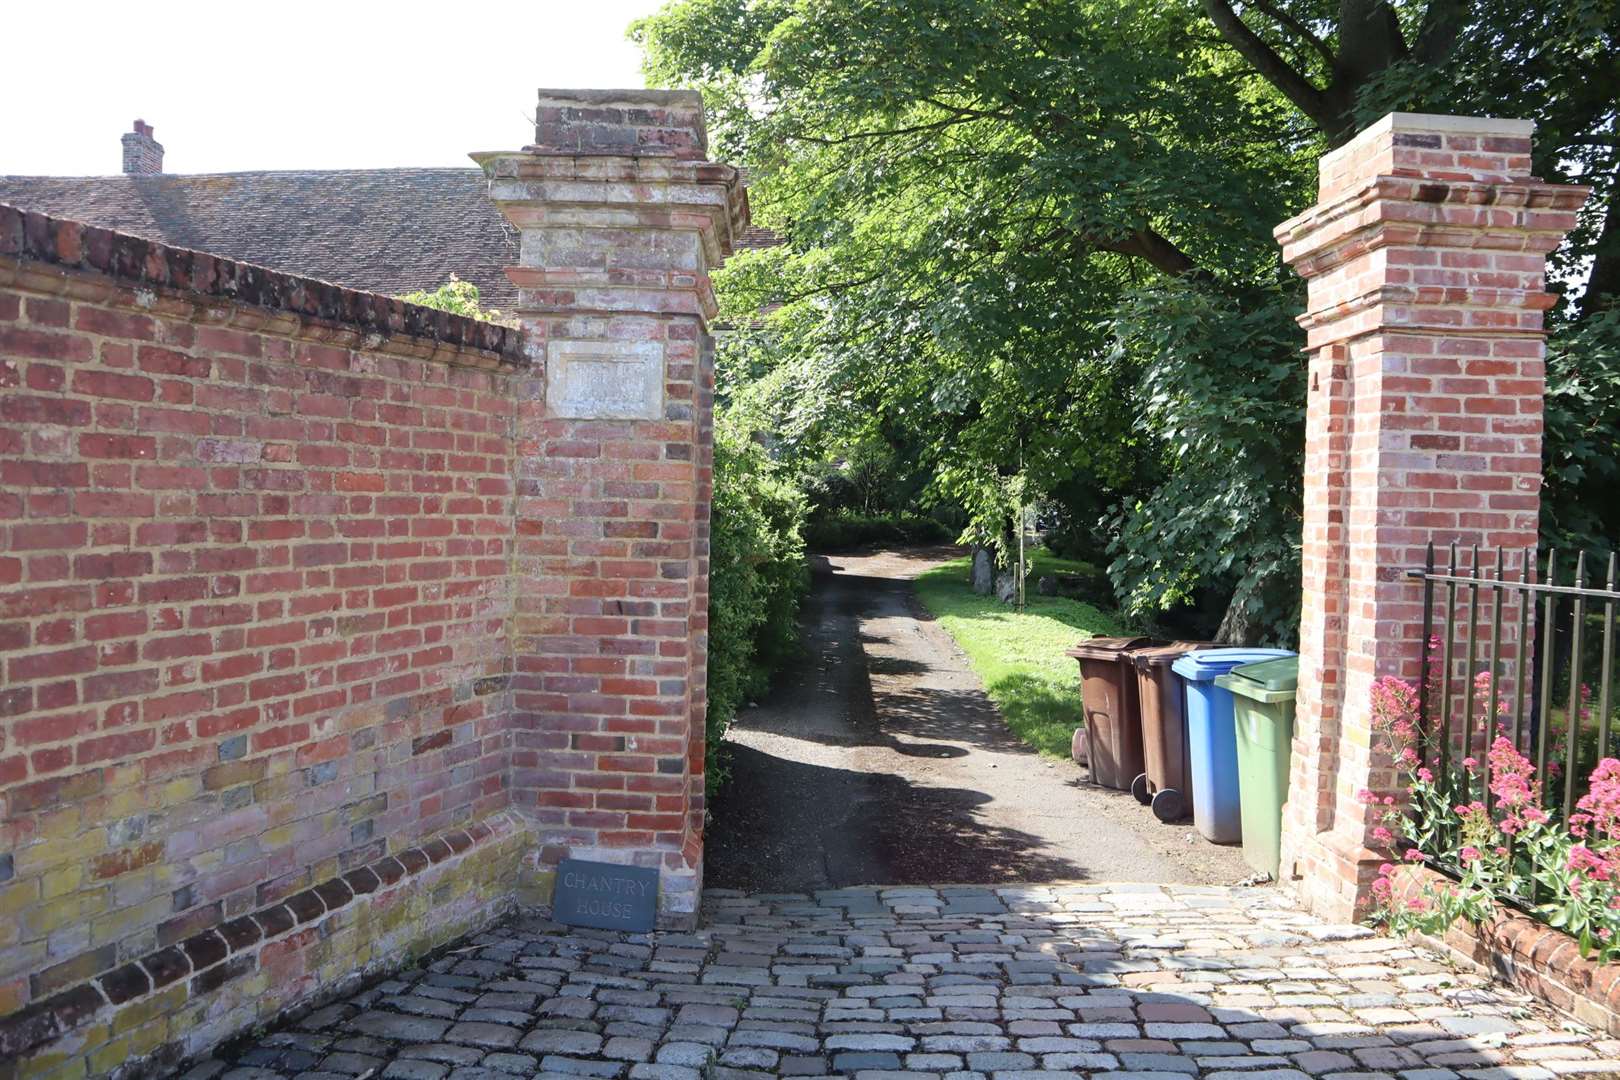 The entrance to Chantry House, Bredgar, where Robert Burgess died in 1937. Picture: John Nurden